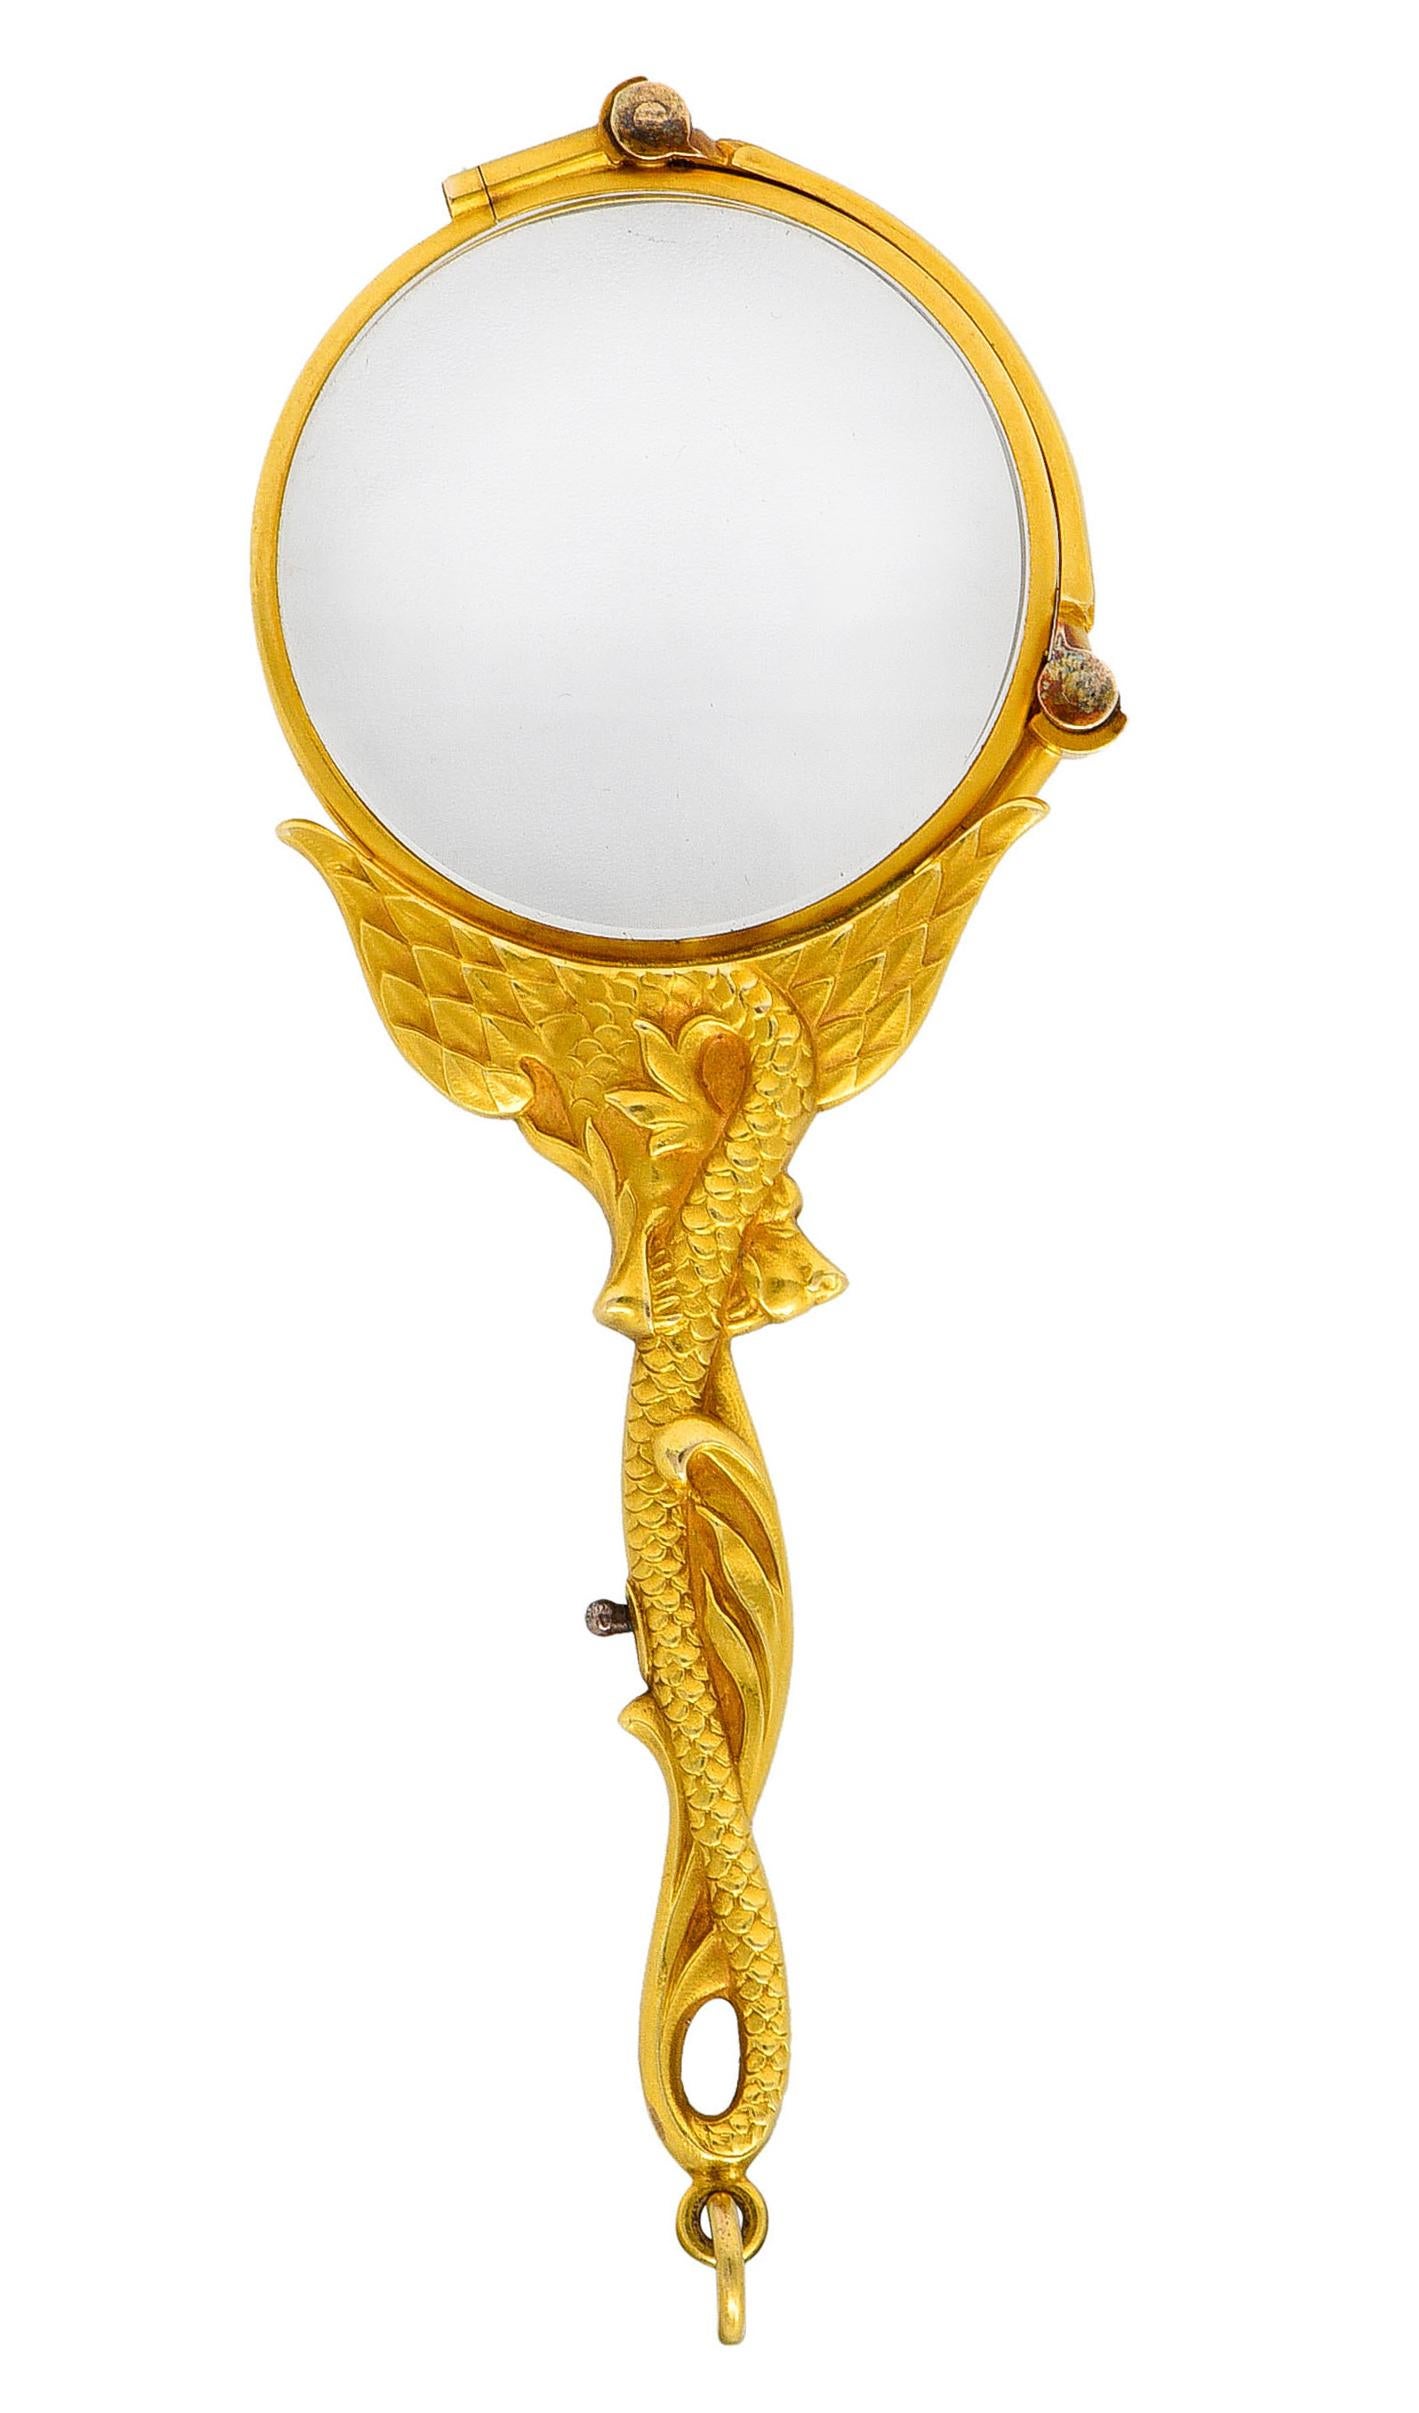 Designed as lorgnette glasses with collapsable dual lenses that release via lever mechanism

Handle is ornately rendered as a whiplashed serpent dragon with detailed wings and scales

Terminates as a jump ring bale

Bridge of glasses is stamped 14KT